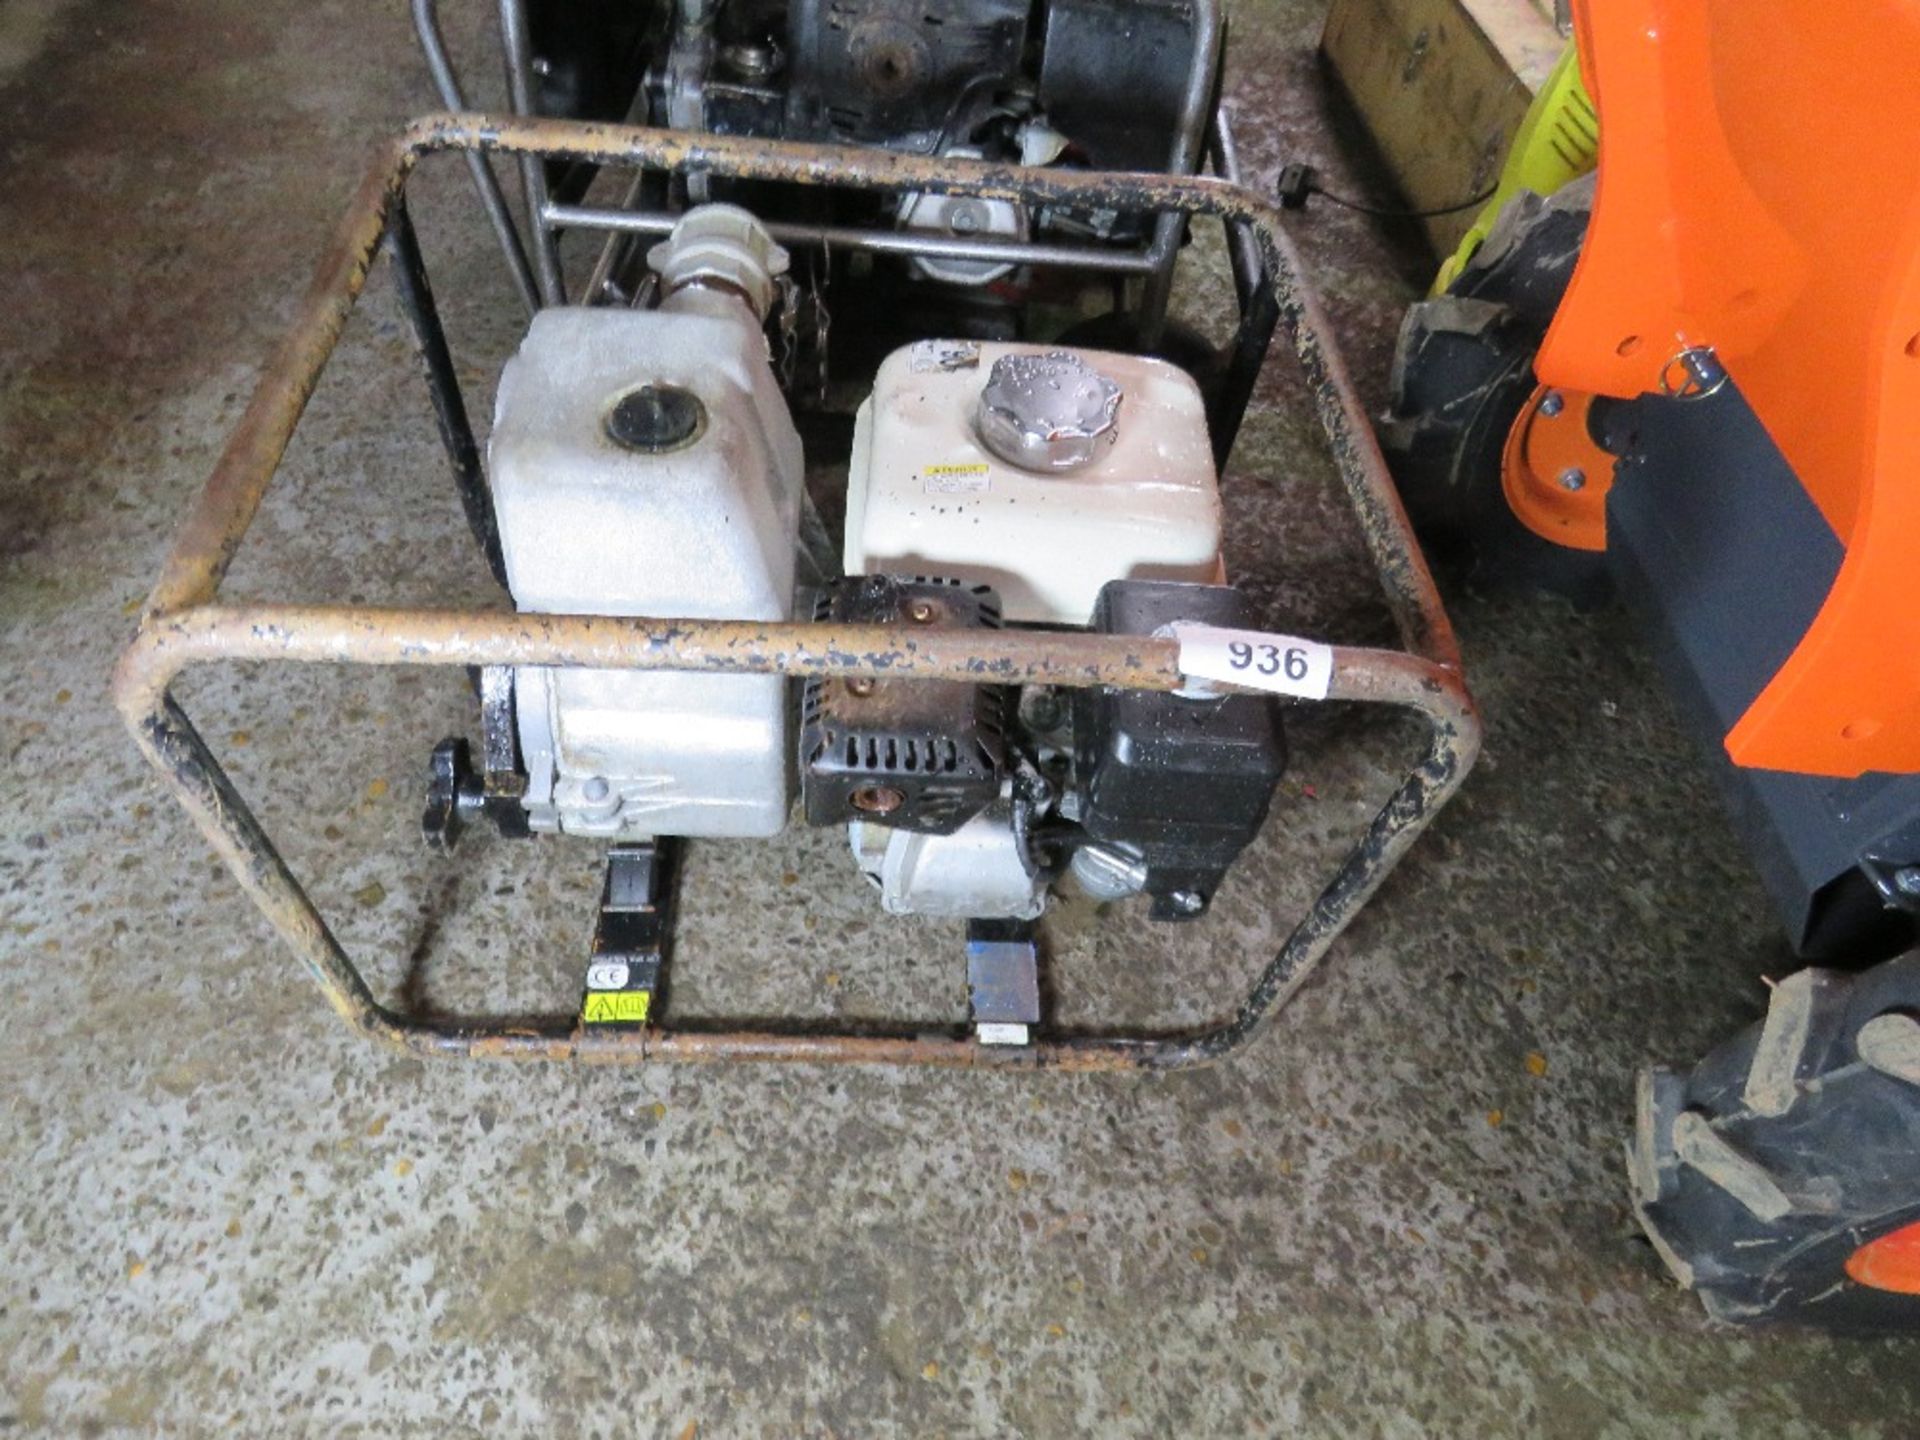 PETROL ENGINED WATER PUMP, LARGE OUTPUT.